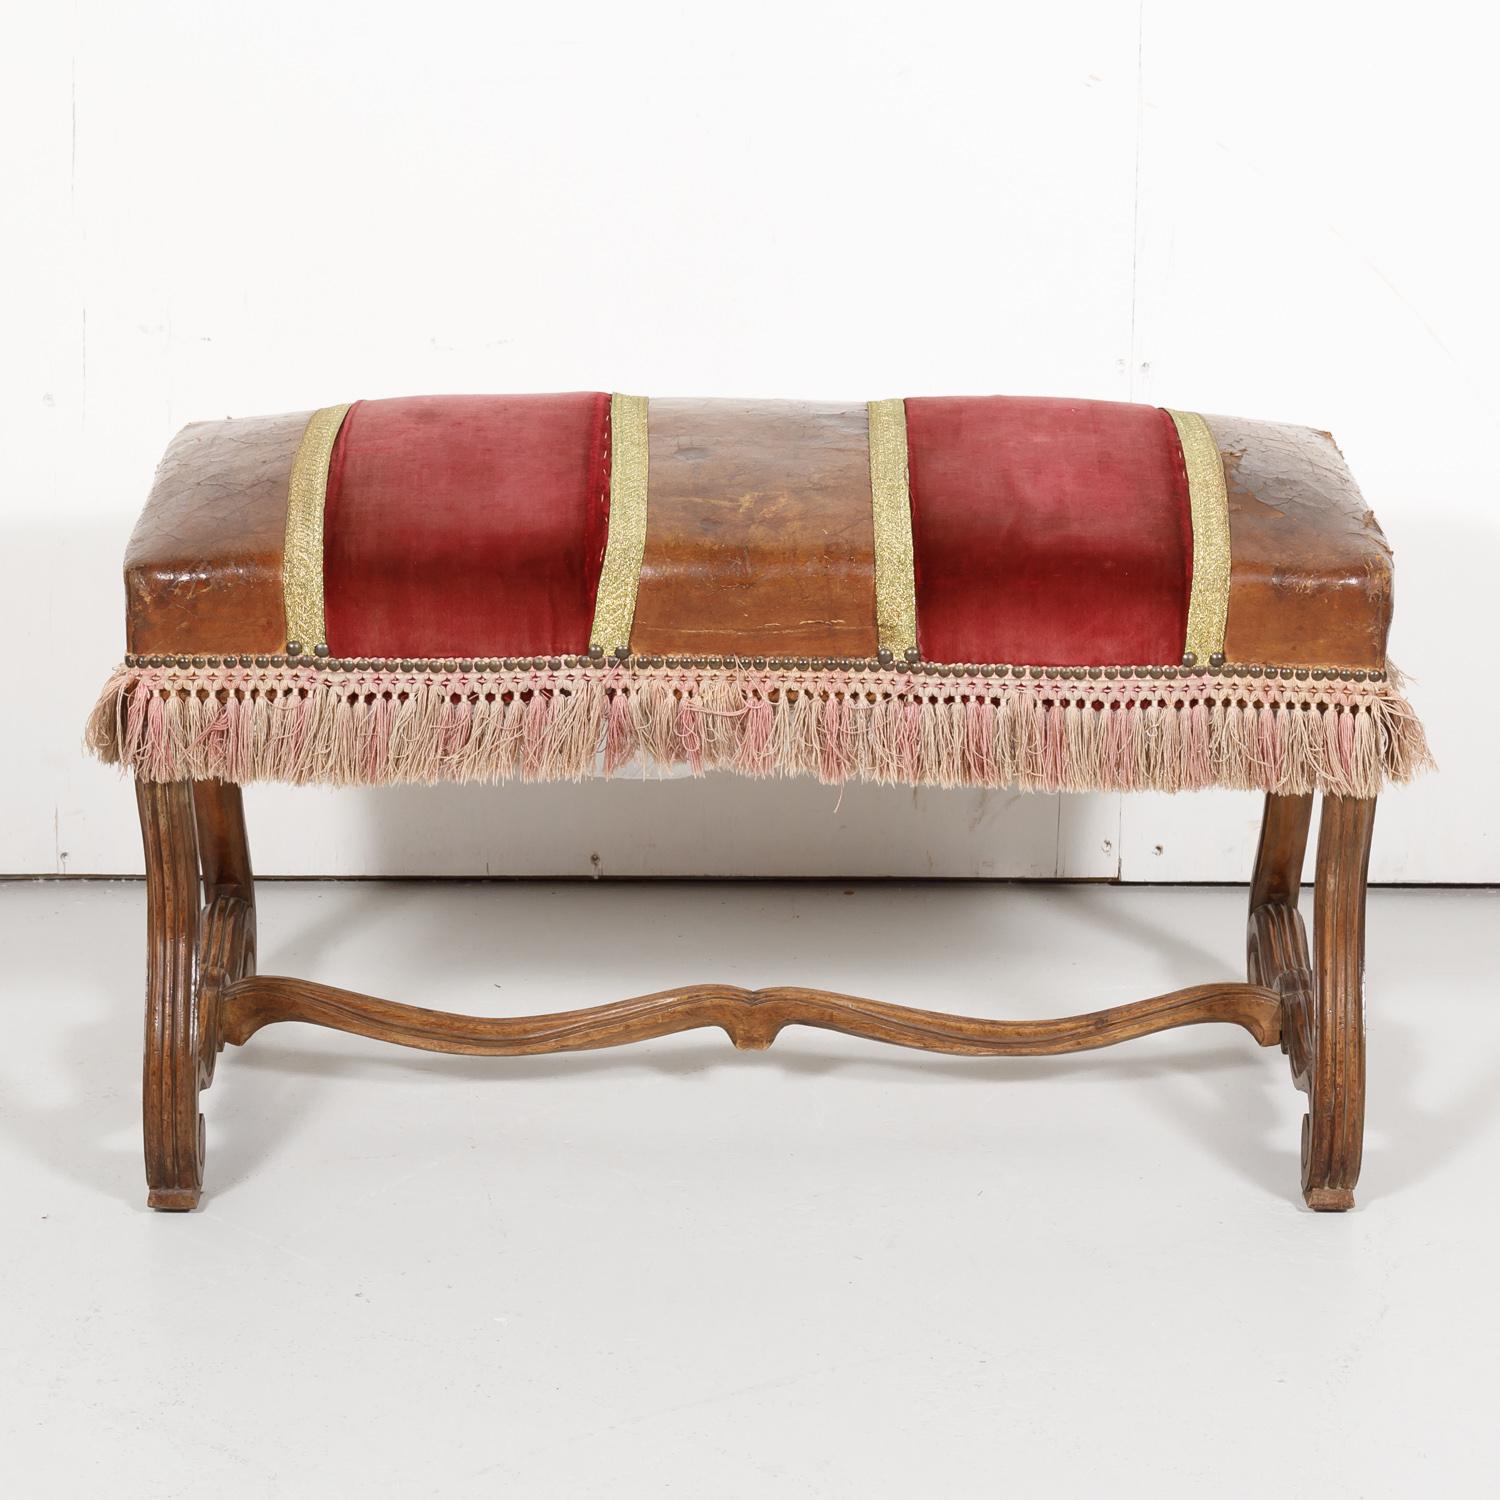 19th Century Spanish Backless Leather and Velvet Louis XIV Style Bench For Sale 1